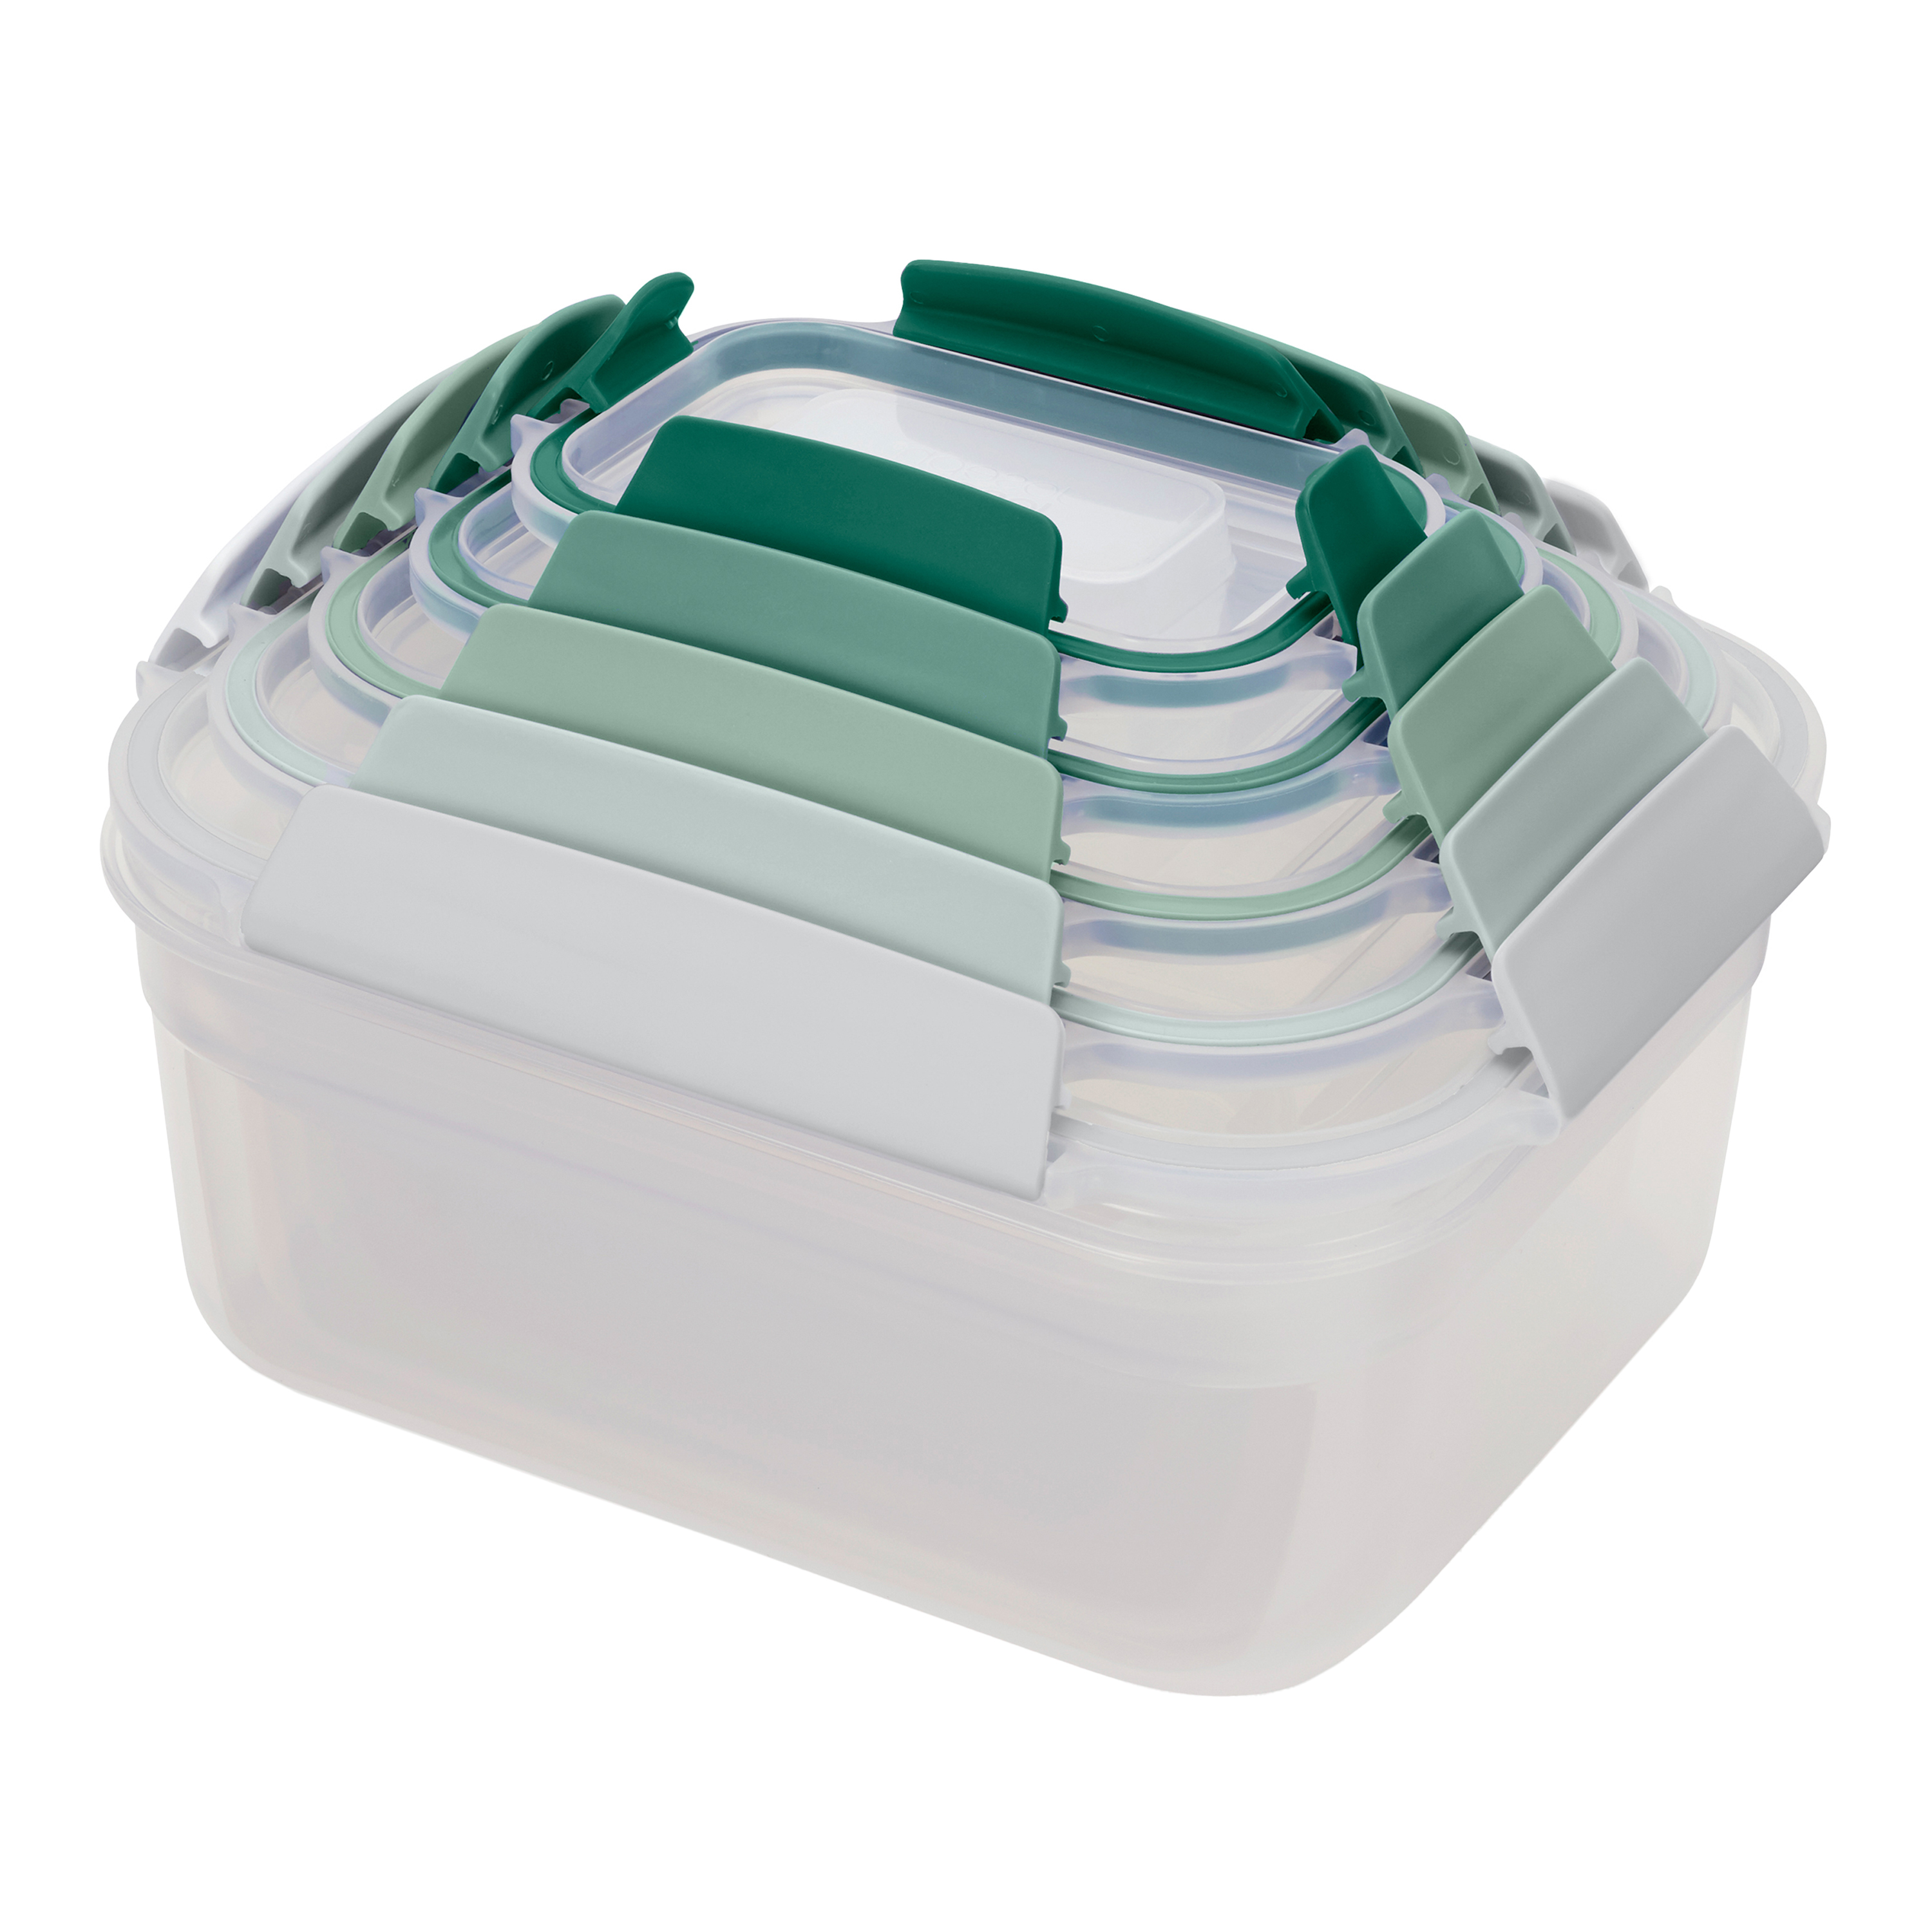 8 Cups/ 63 Oz 4 Piece (2 containers + 2 Lids) Large Glass Storage/ Baking  Containers with Locking Lids . Ideal for Storing food, vegetables or  fruits.